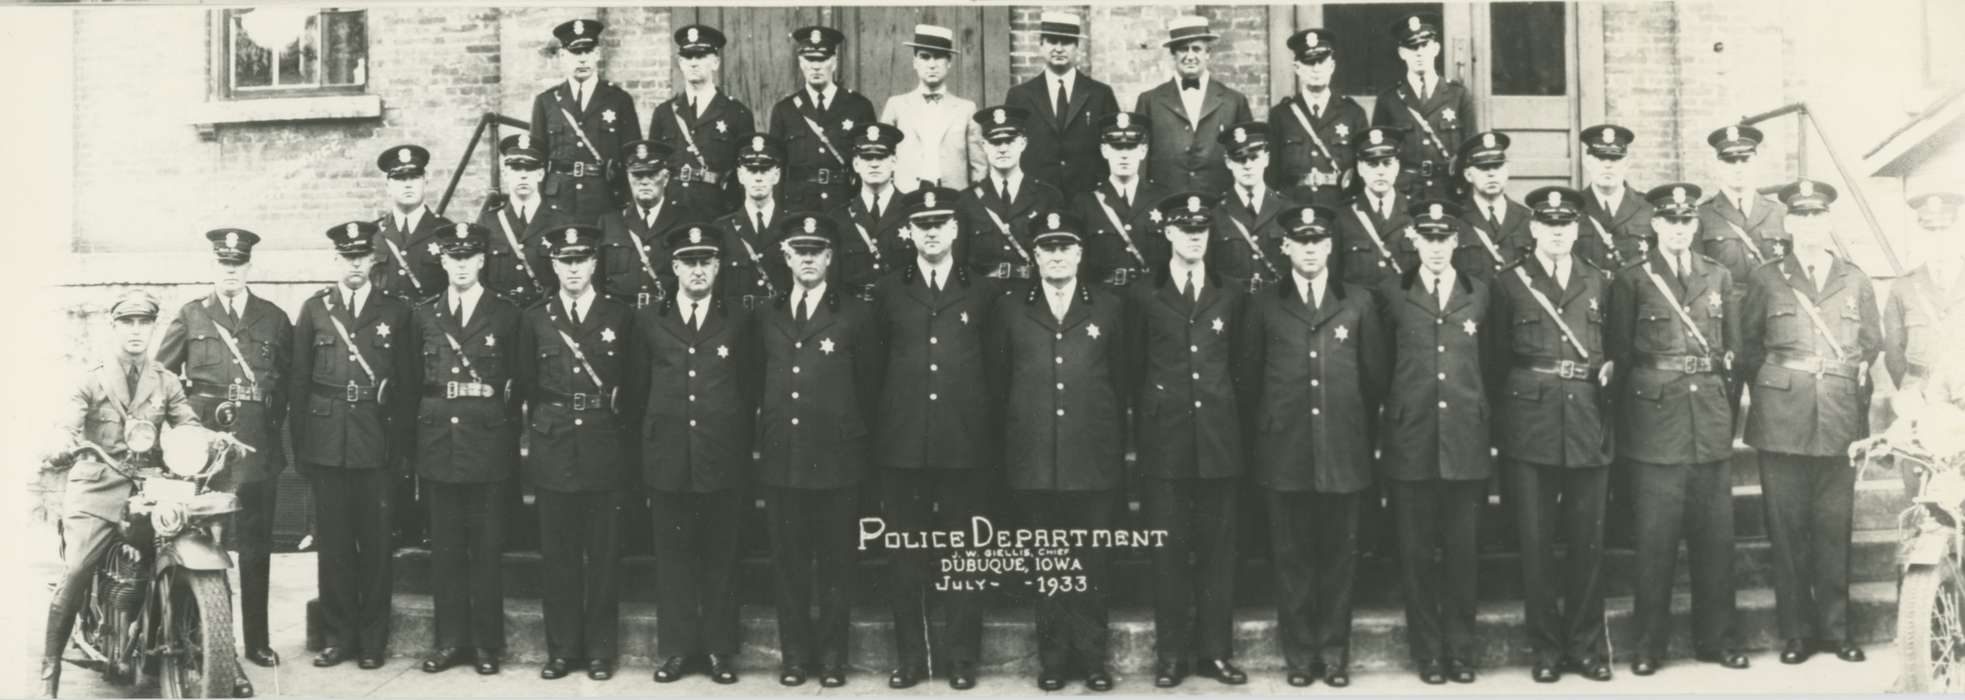 history of Iowa, Iowa History, motorcycle, uniform, Portraits - Group, police, Iowa, Whitfield, Carla & Richard, Dubuque, IA, Cities and Towns, Labor and Occupations